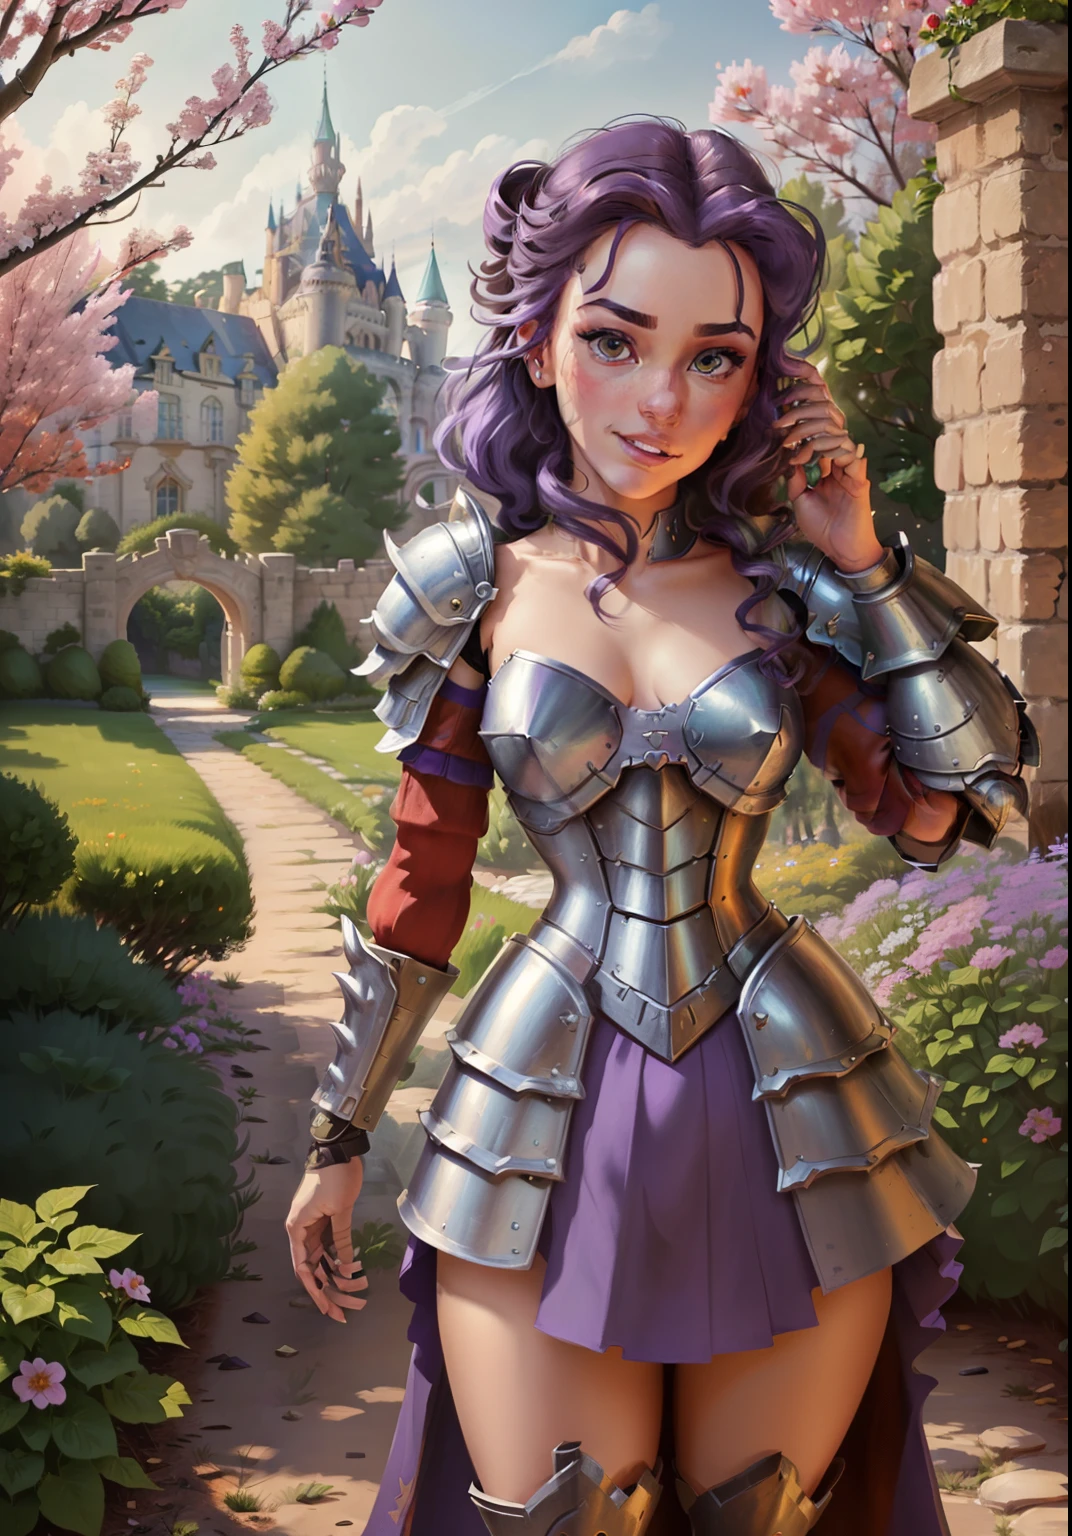 (BelleWaifu:1), (knight's armor:0.5), the garden in the background, surprised, cute, cute pose, (flirting), looking at the viewer, (square hairstyle), (purple hair), (red skirt:1.2), (An armored lifter on a naked body:1.5), (Sword in hand:0.7), :D, (realistic: 1), (cartoon), (masterpiece: 1.2), (best quality), (over-detailed), (8k, 4k, intricate), (full-length shot: 1), (cowboy shot: 1.2), (85mm), light particles, lighting, (very detailed: 1.2), (detailed face: 1), (gradients), sfw, colorful, (detailed eyes: 1.2), (detailed landscape, trees, garden, castle:1.2),(detailed background), detailed landscape, (dynamic angle:1.2), (dynamic pose:1.2), (rule third_composition:1.3), (line of action:1.2), wide view, daylight, solo
